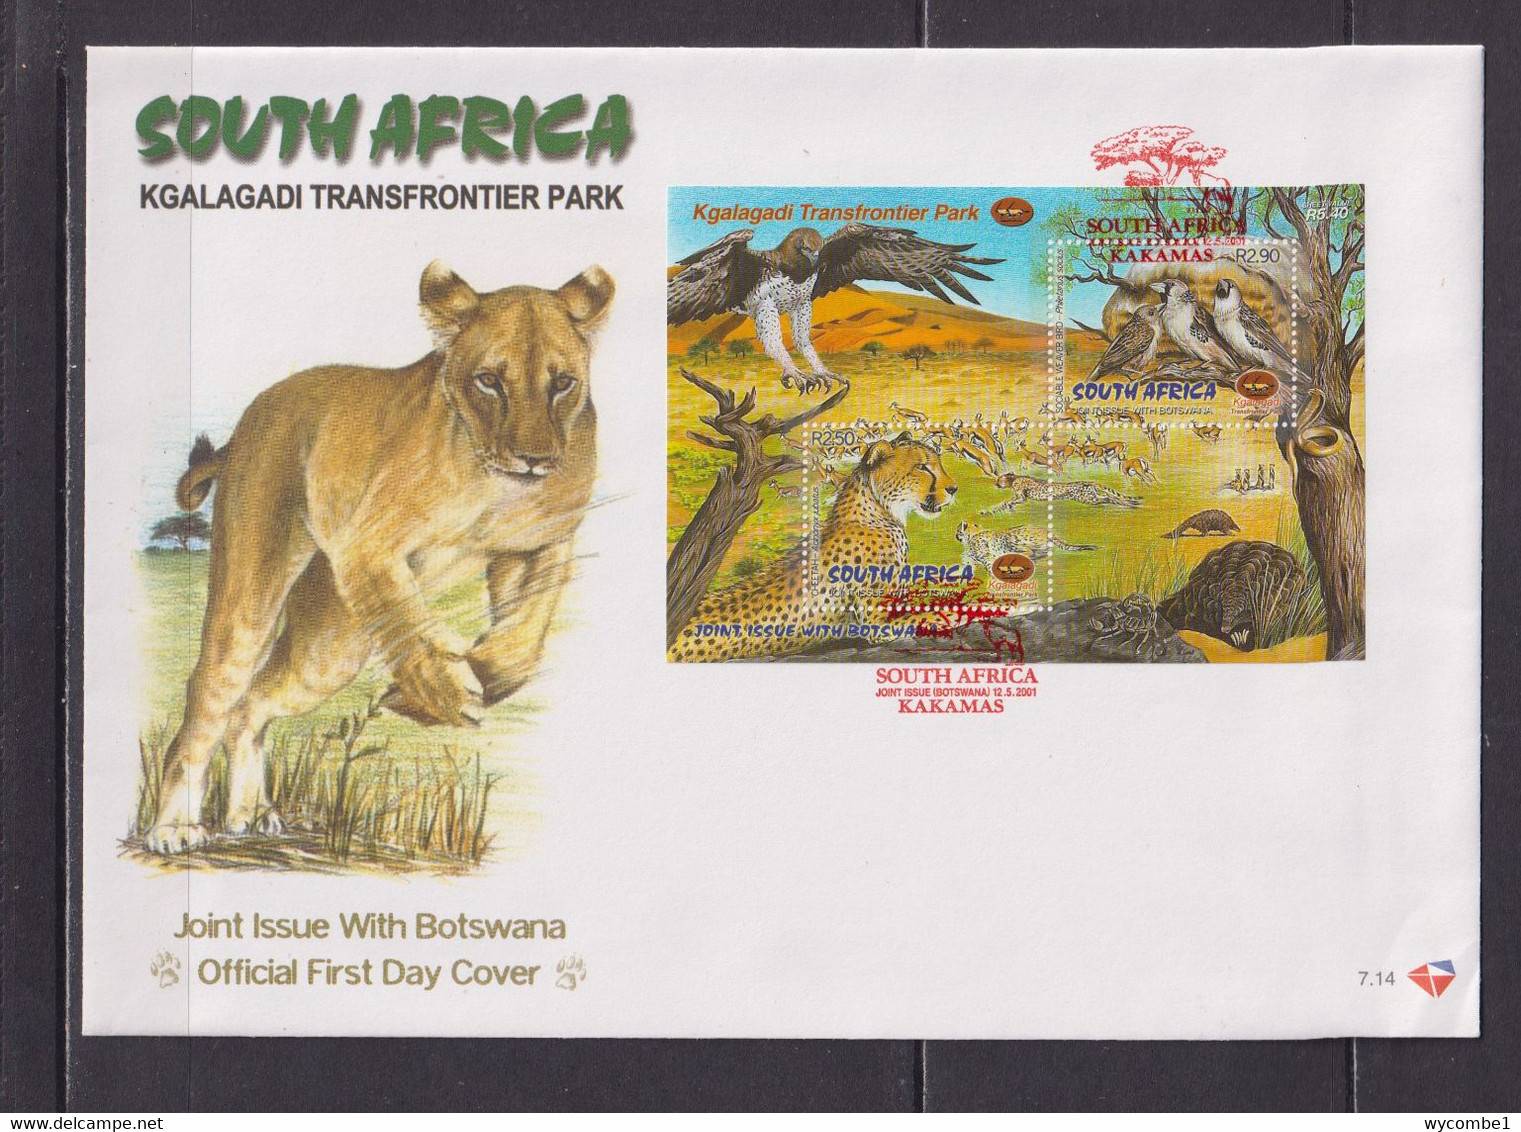 SOUTH AFRICA - 2001 Kgalagadi Transfrontier Park Miniature Sheet Large FDC As Scan - Covers & Documents